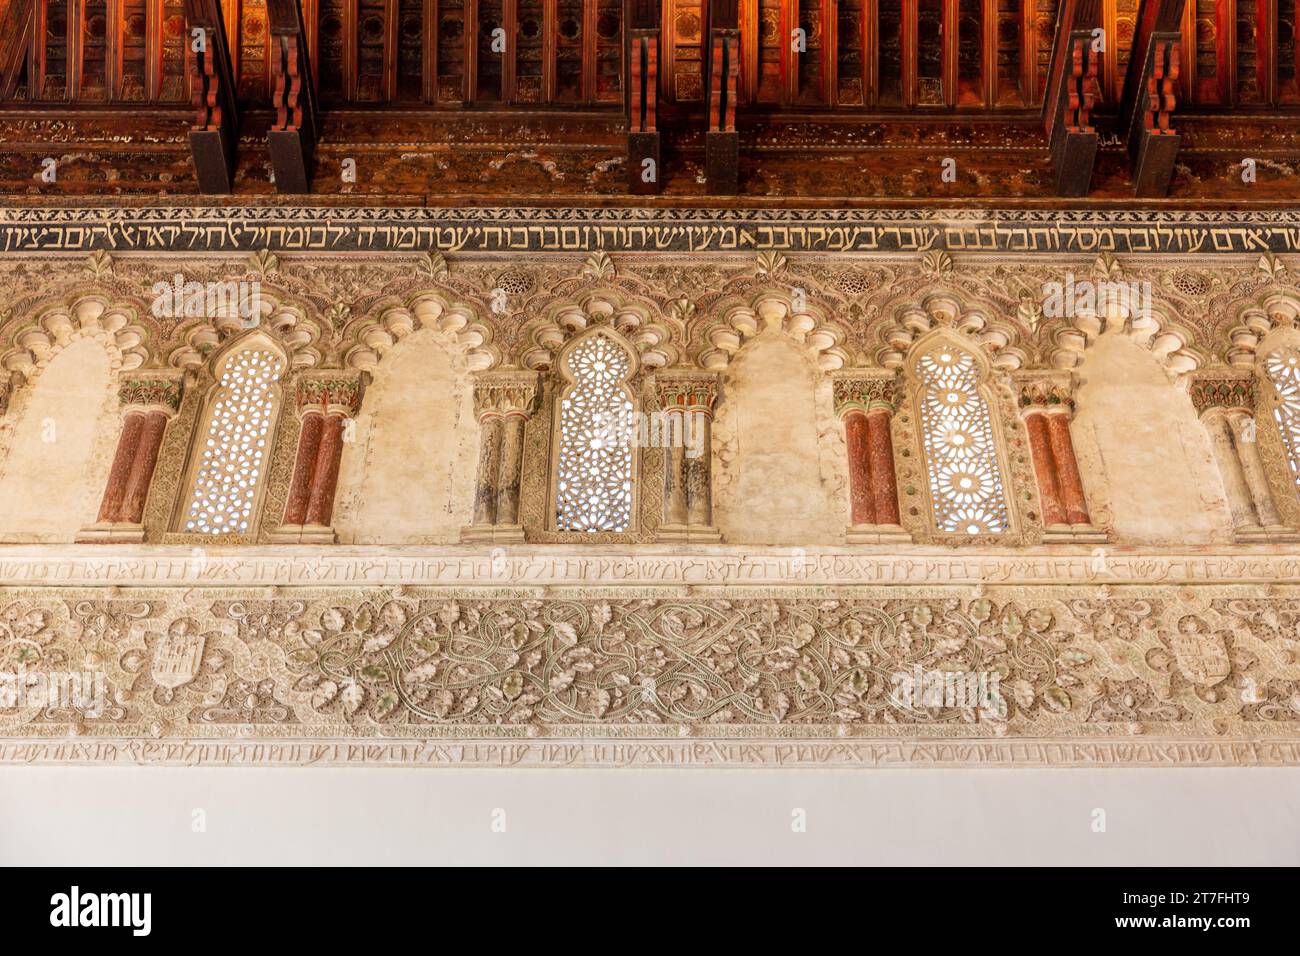 Toledo, Spain, 08.10.21. Rich Mudejar, Nasrid-style polychrome stucco decorations, arches, floral patterns in the Synagogue of El Transito. Stock Photo